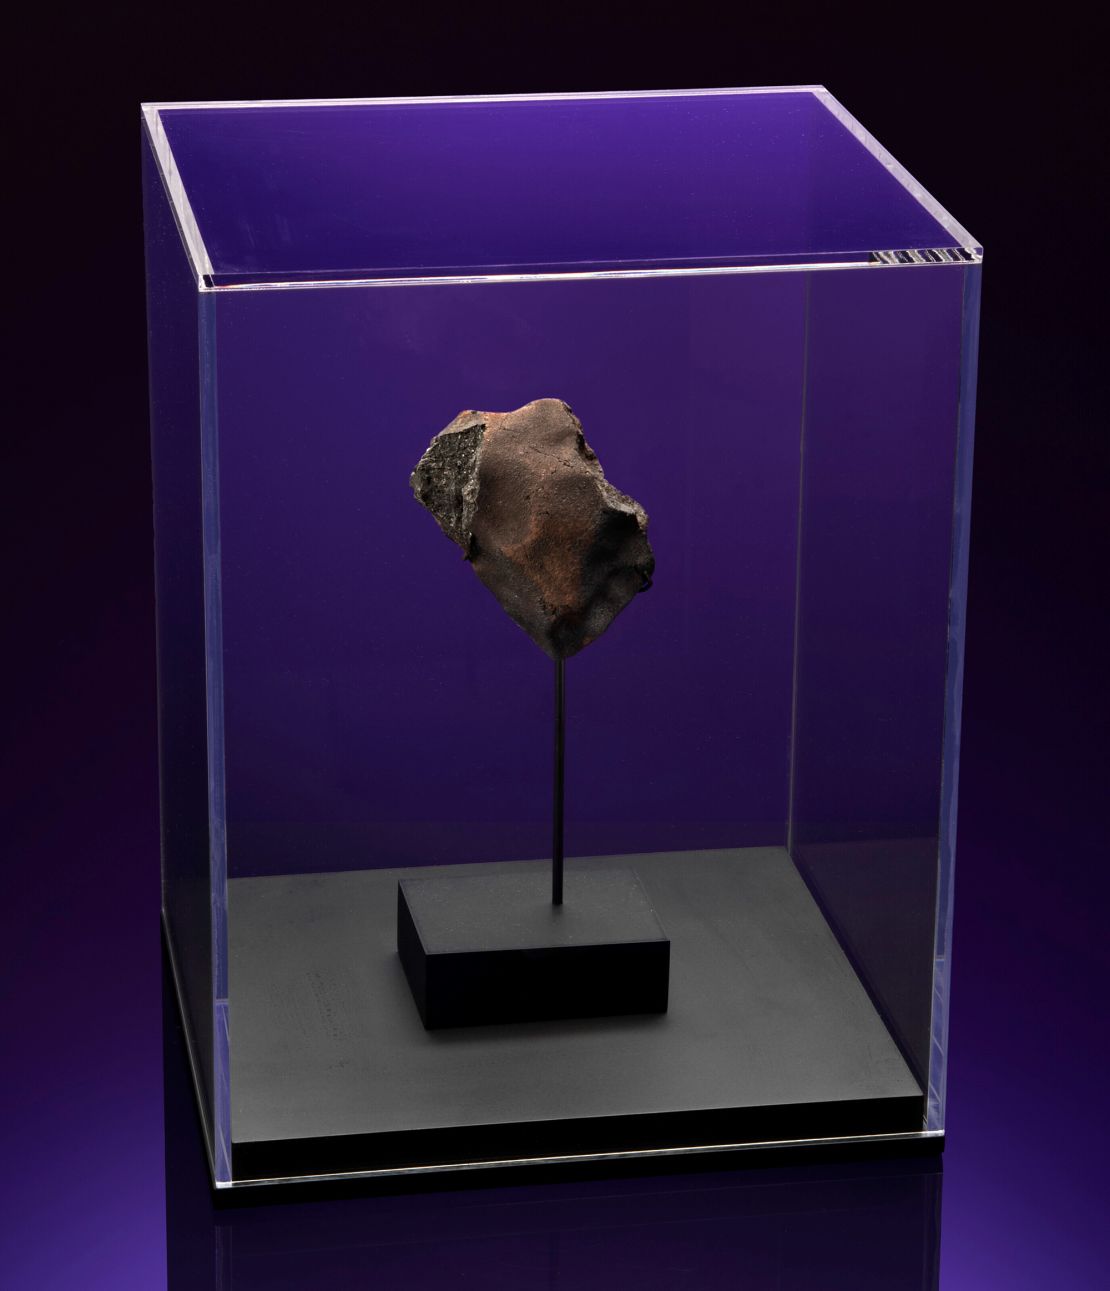 A meteorite named 'Aguas Zarcas (CM2) Meteorite' that crashed through the roof of a doghouse in the city of Aguas Zarcas, Central Costa Rica, on April 23, 2019, is on view at Christie's online-only auction: 'Deep Impact: Martian Lunar and Other Rare Meteorites', in February 2022. 